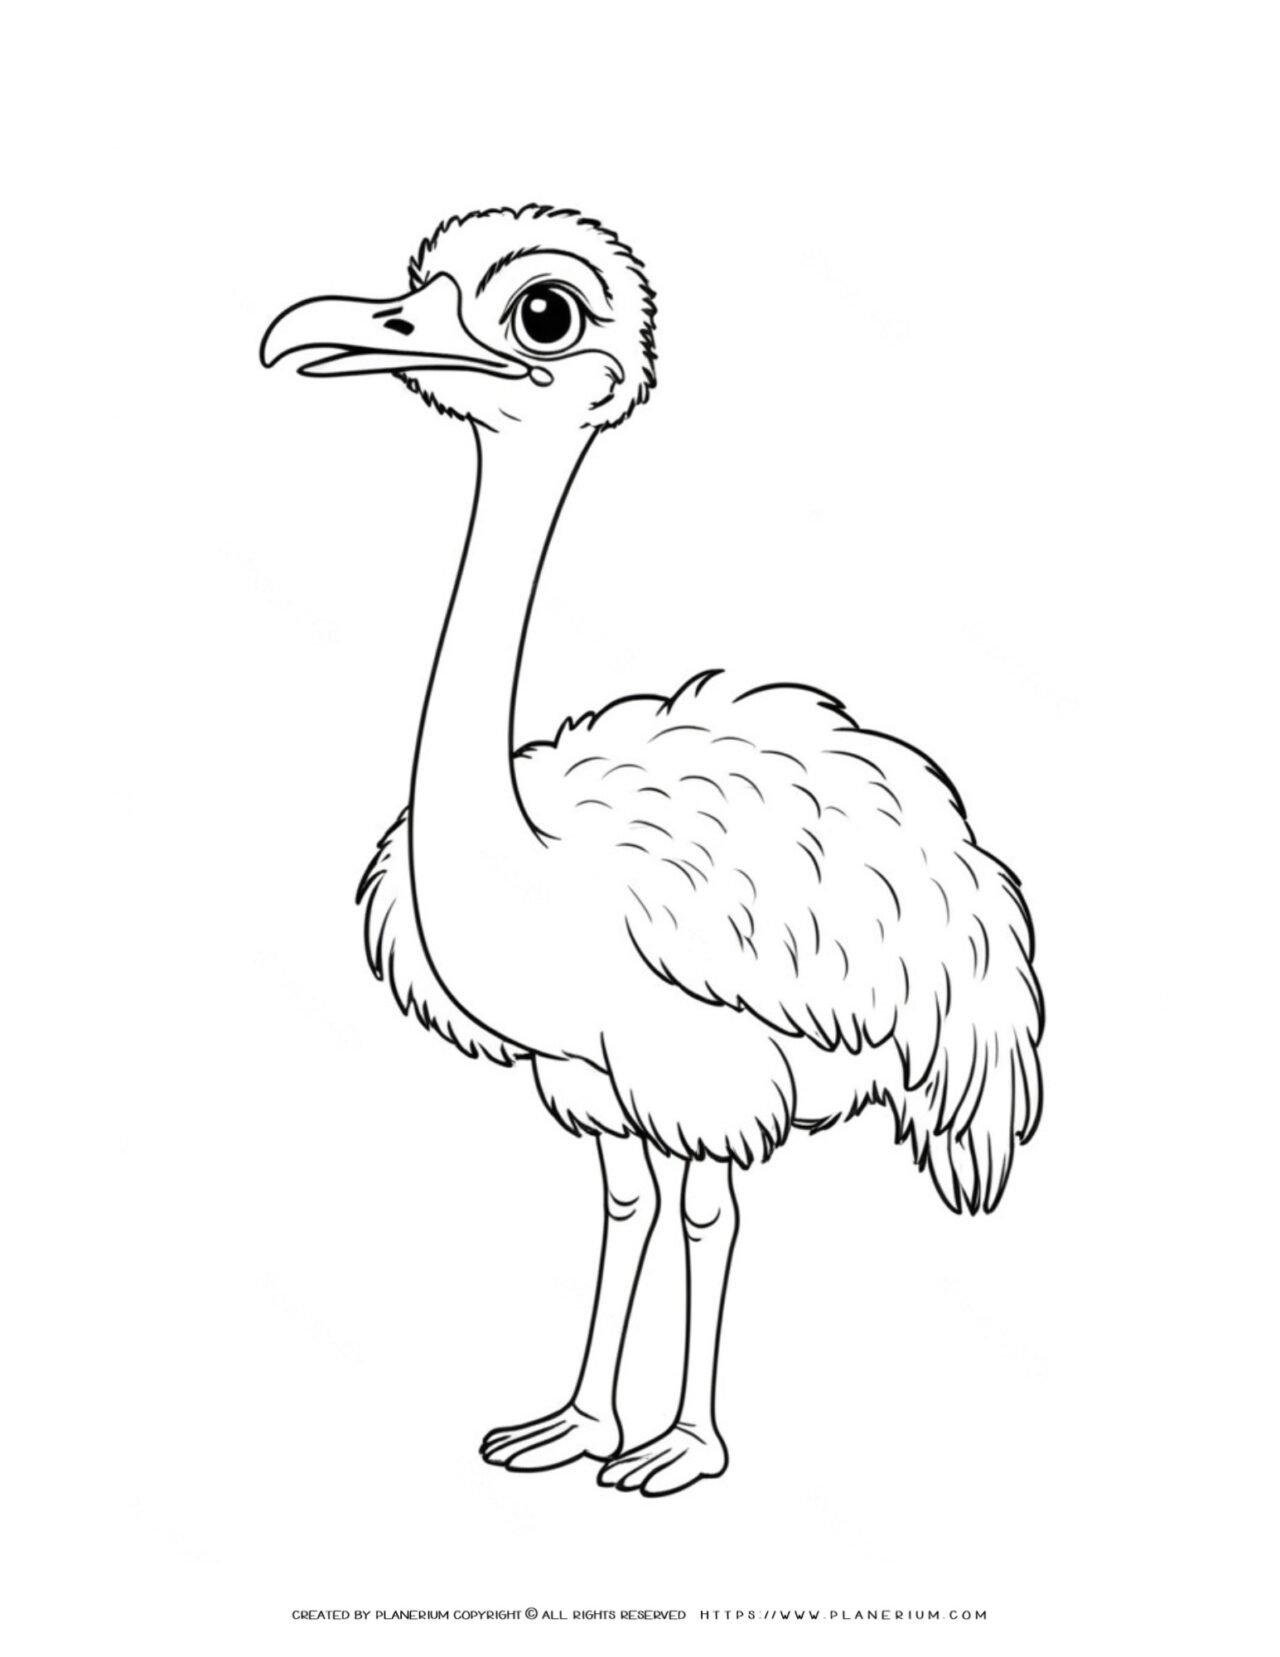 ostrich-outline-comic-style-coloring-page-for-kids